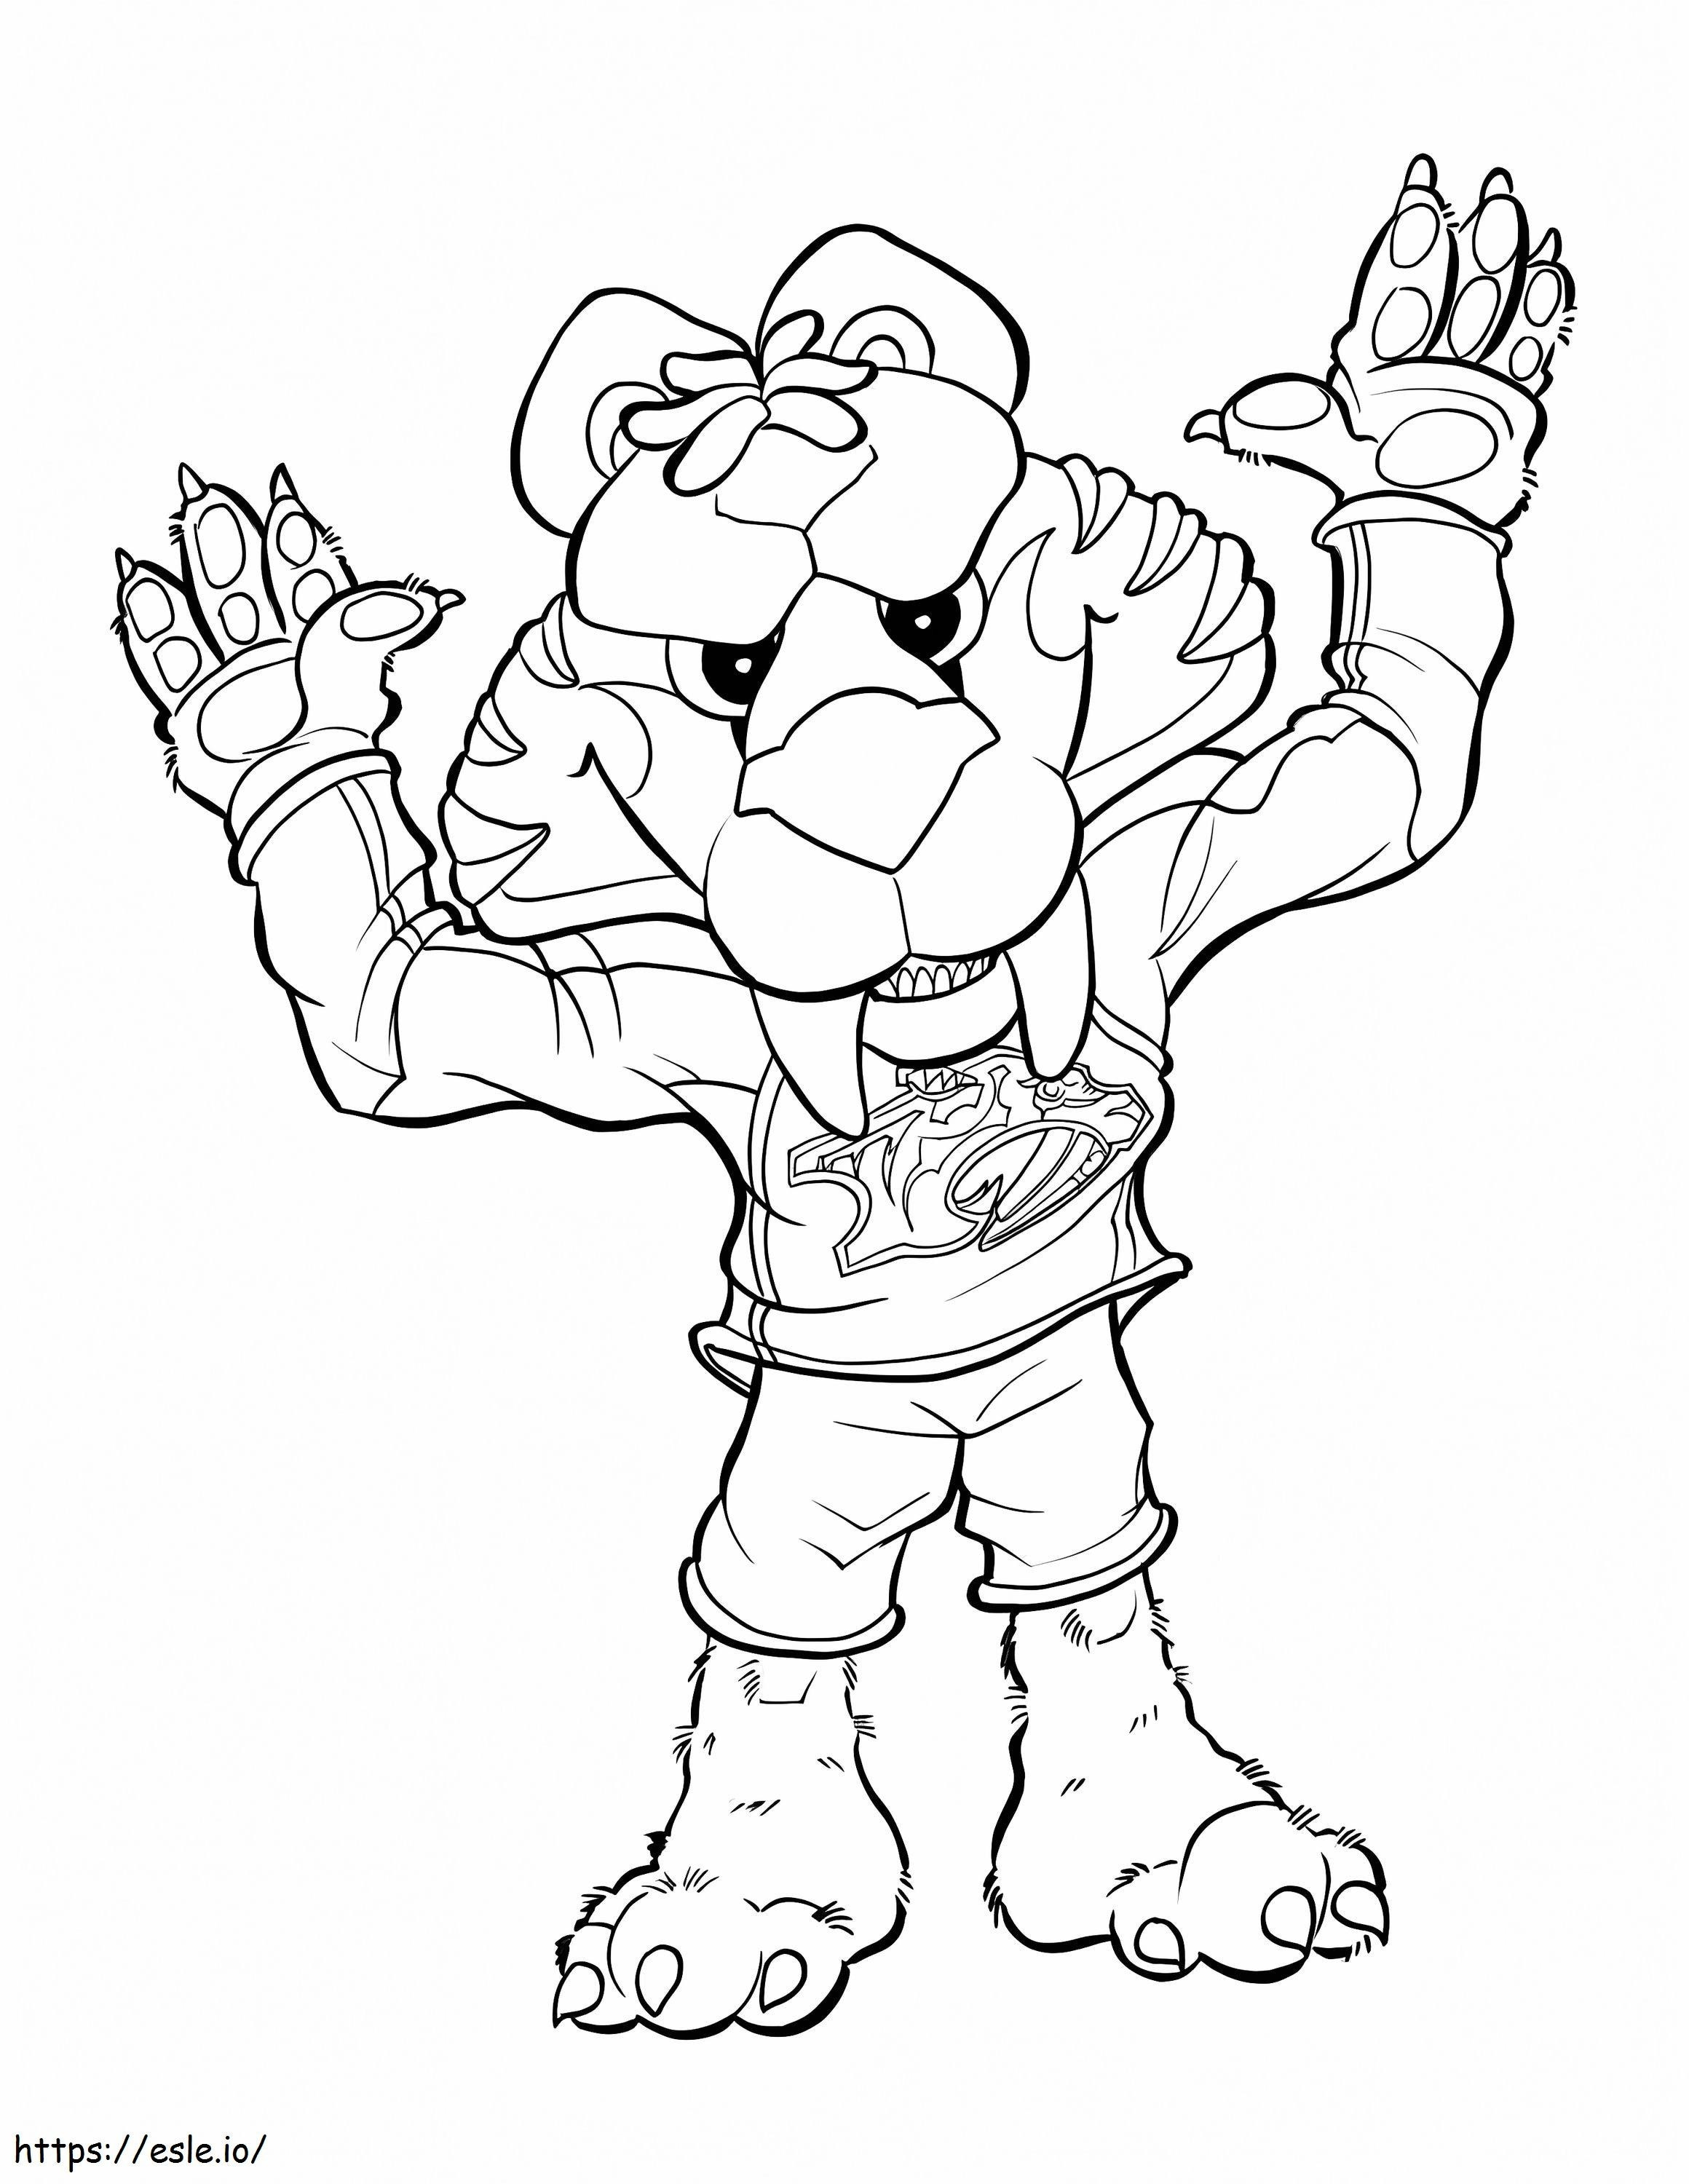 Vancouver Mascots coloring page